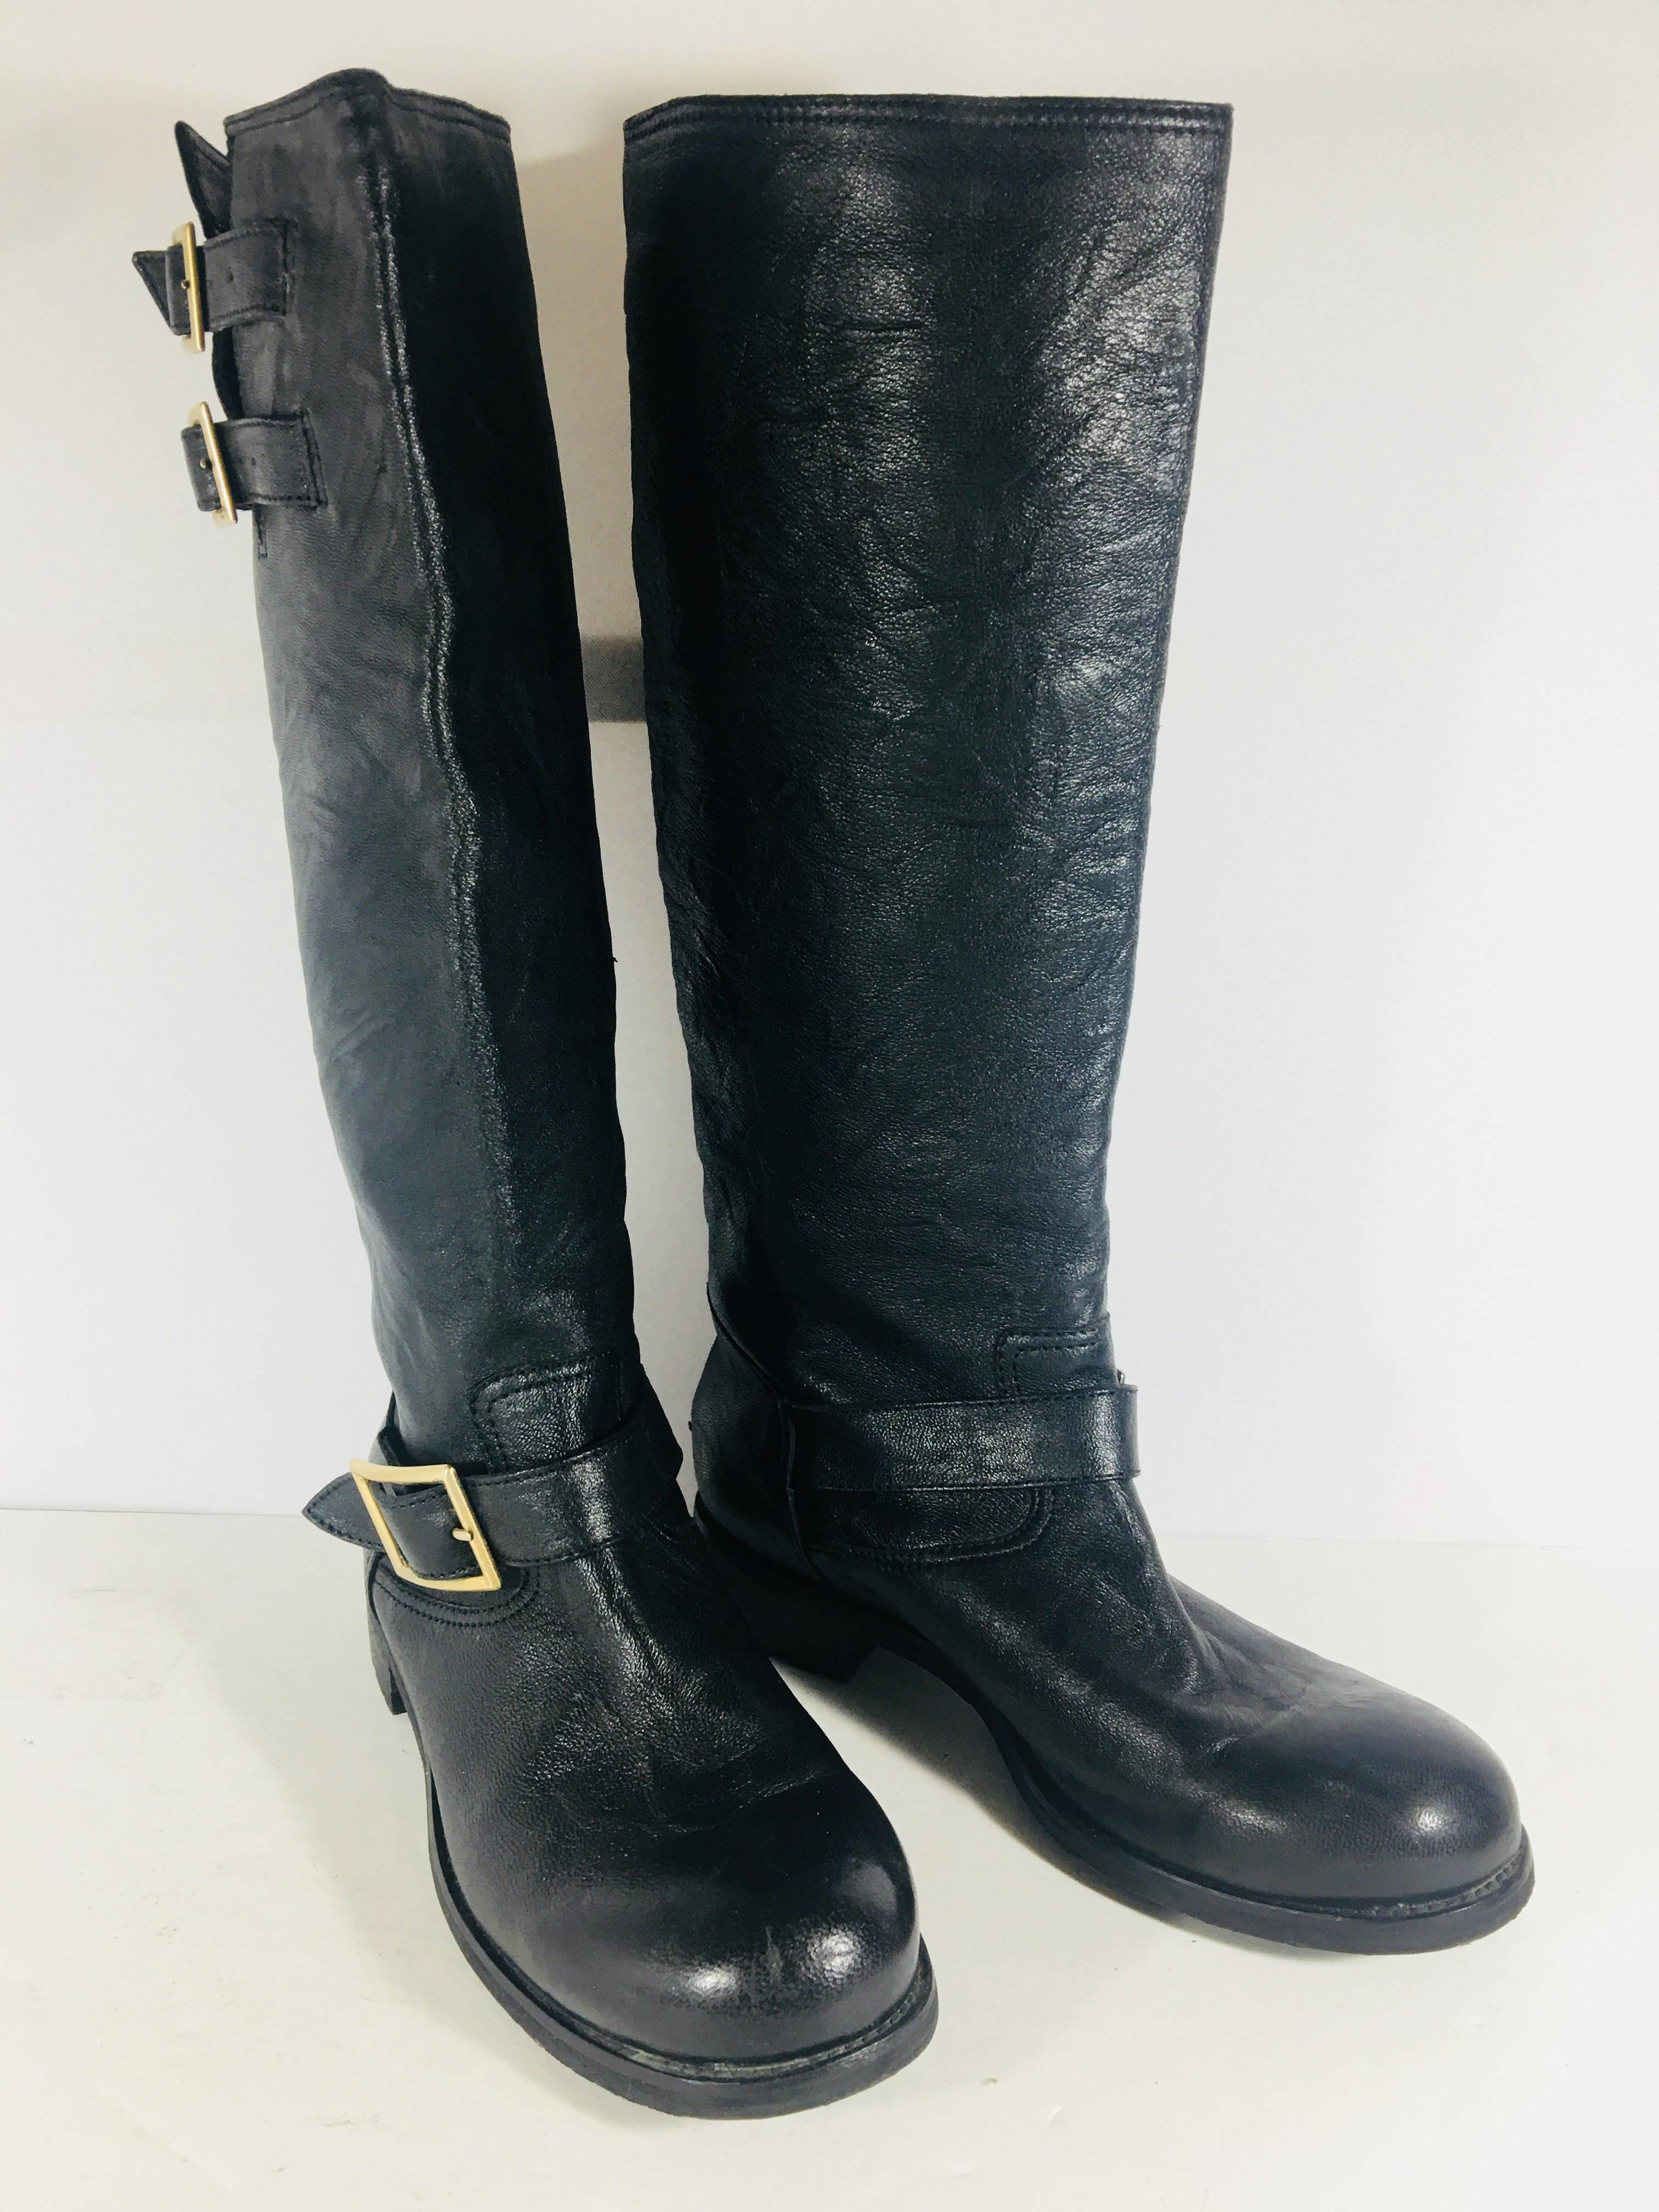 Jimmy Choo Black Leather Knee High Motorcycle Boot with Gold Hardware.